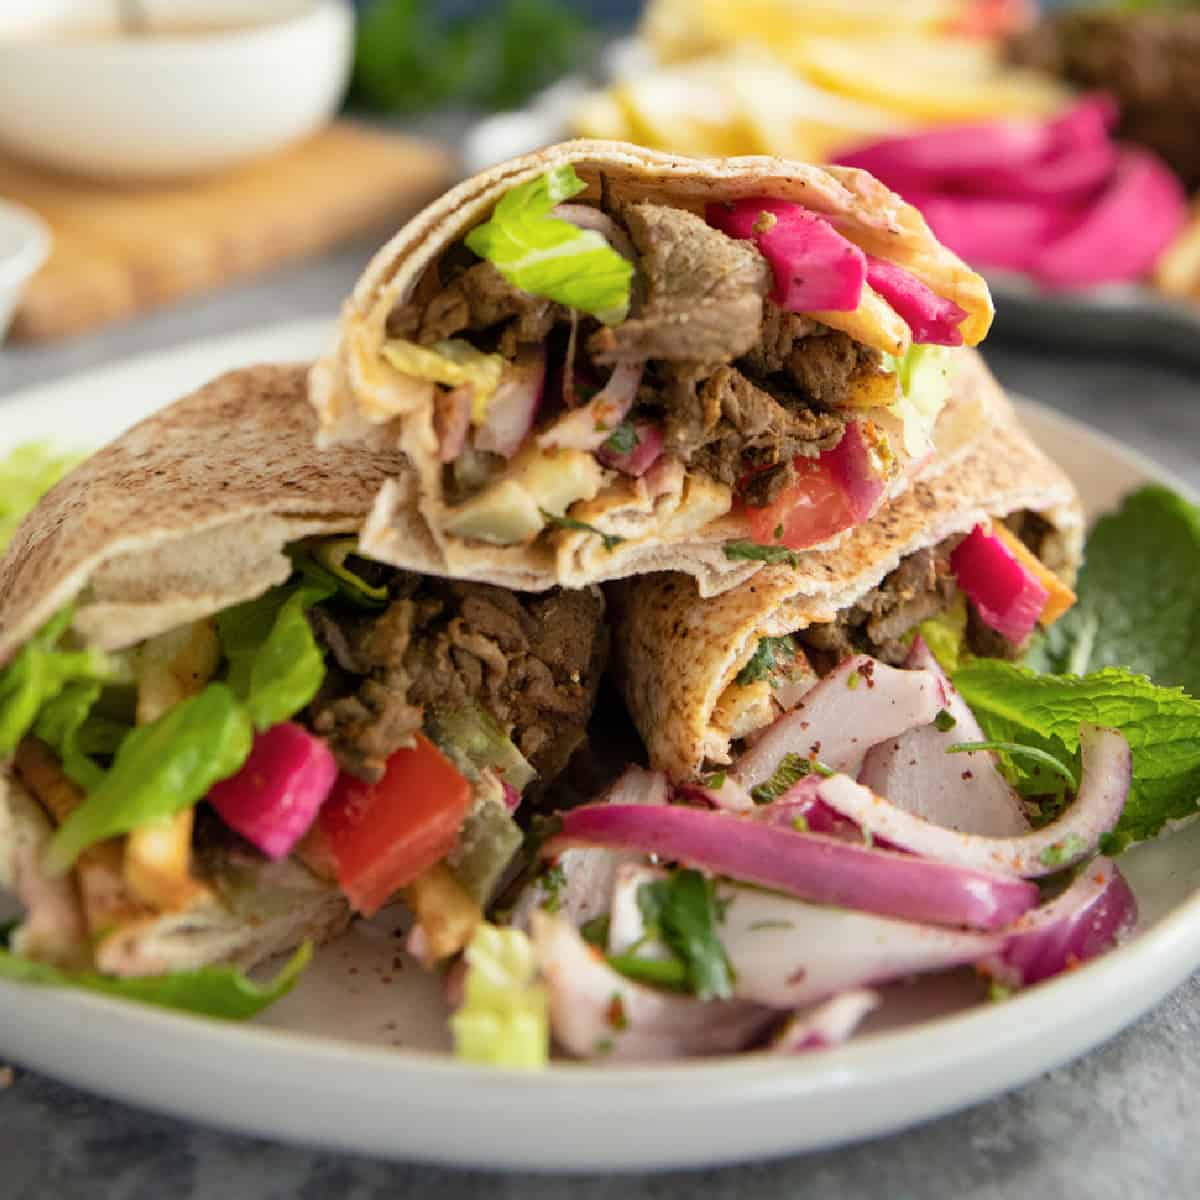 Beef shawarma is a classic Middle Eastern street food. Tender slices of beef are marinated in olive oil and warm shawarma spices and cooked to perfection, then wrapped in a pita bread with vegetables and fries. Learn how to make beef shawarma at home with my tips and tricks.
